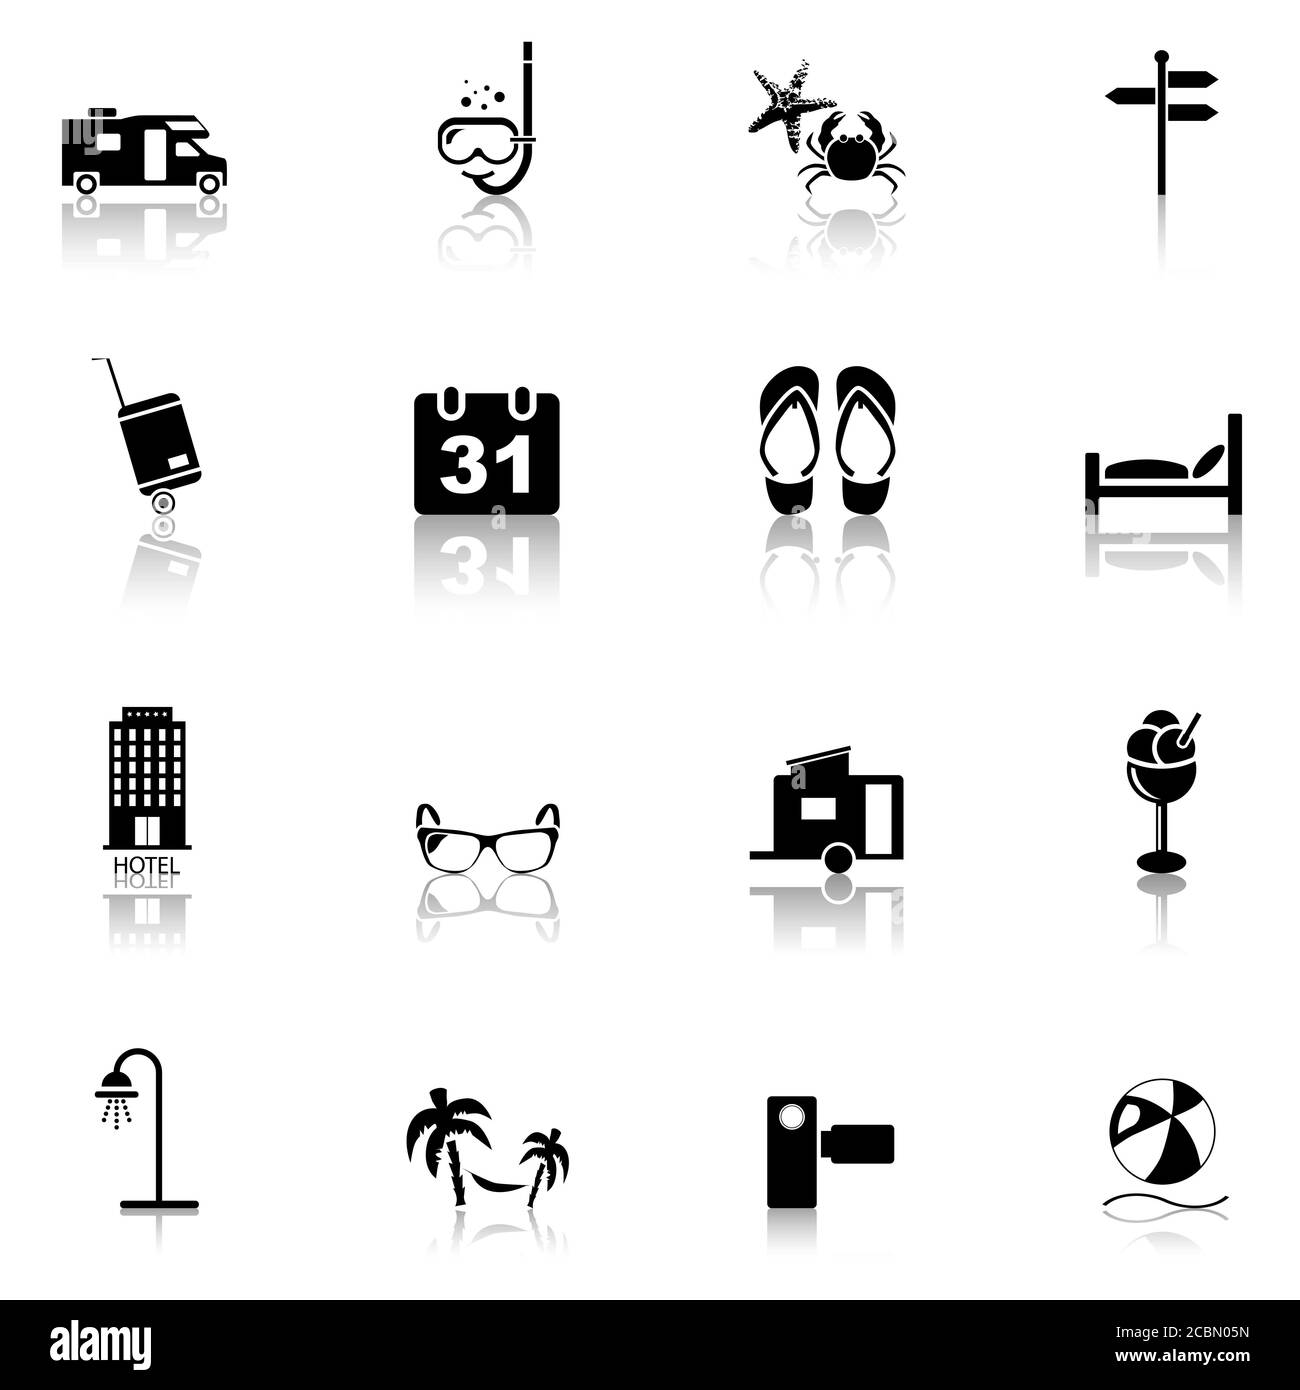 Illustration of black vacation-related icons with reflections isolated on a white background Stock Photo